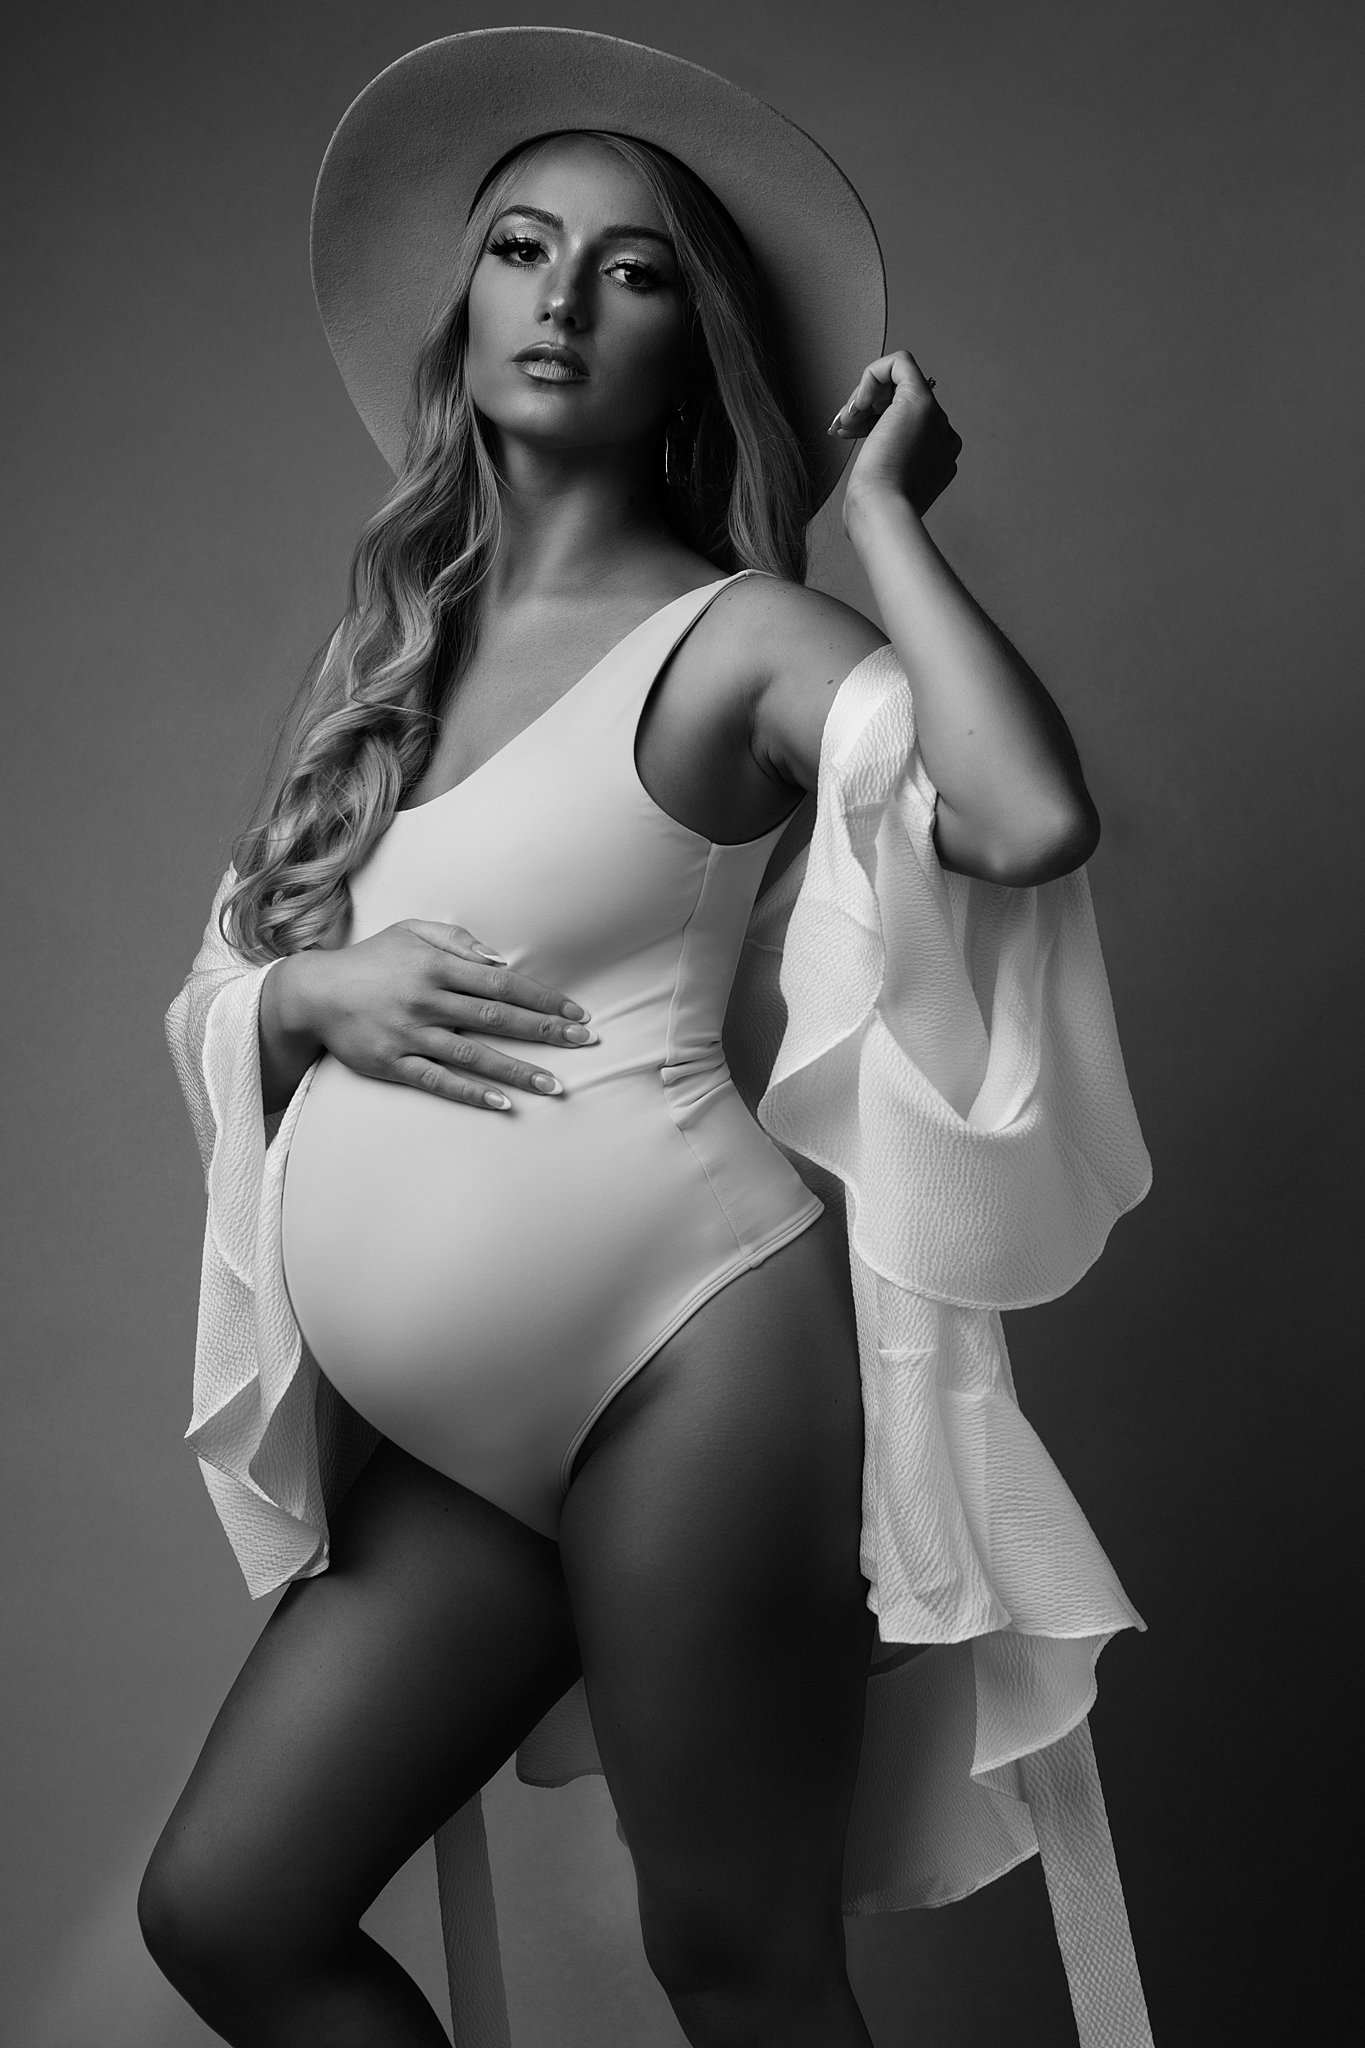 woman in light bodysuit with her hand on her baby bump